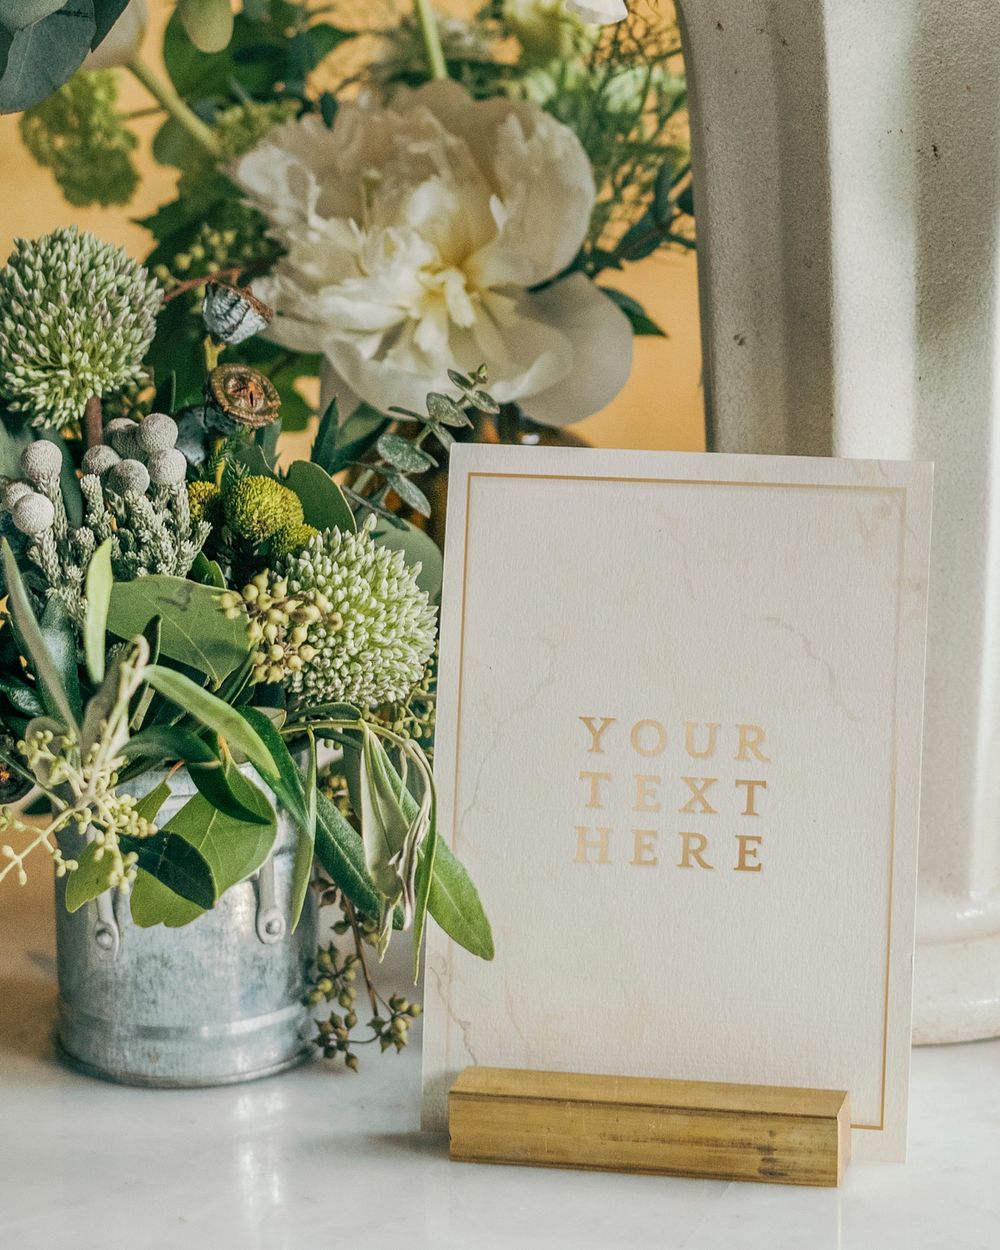 Bucket of fresh flowers with a card mockup